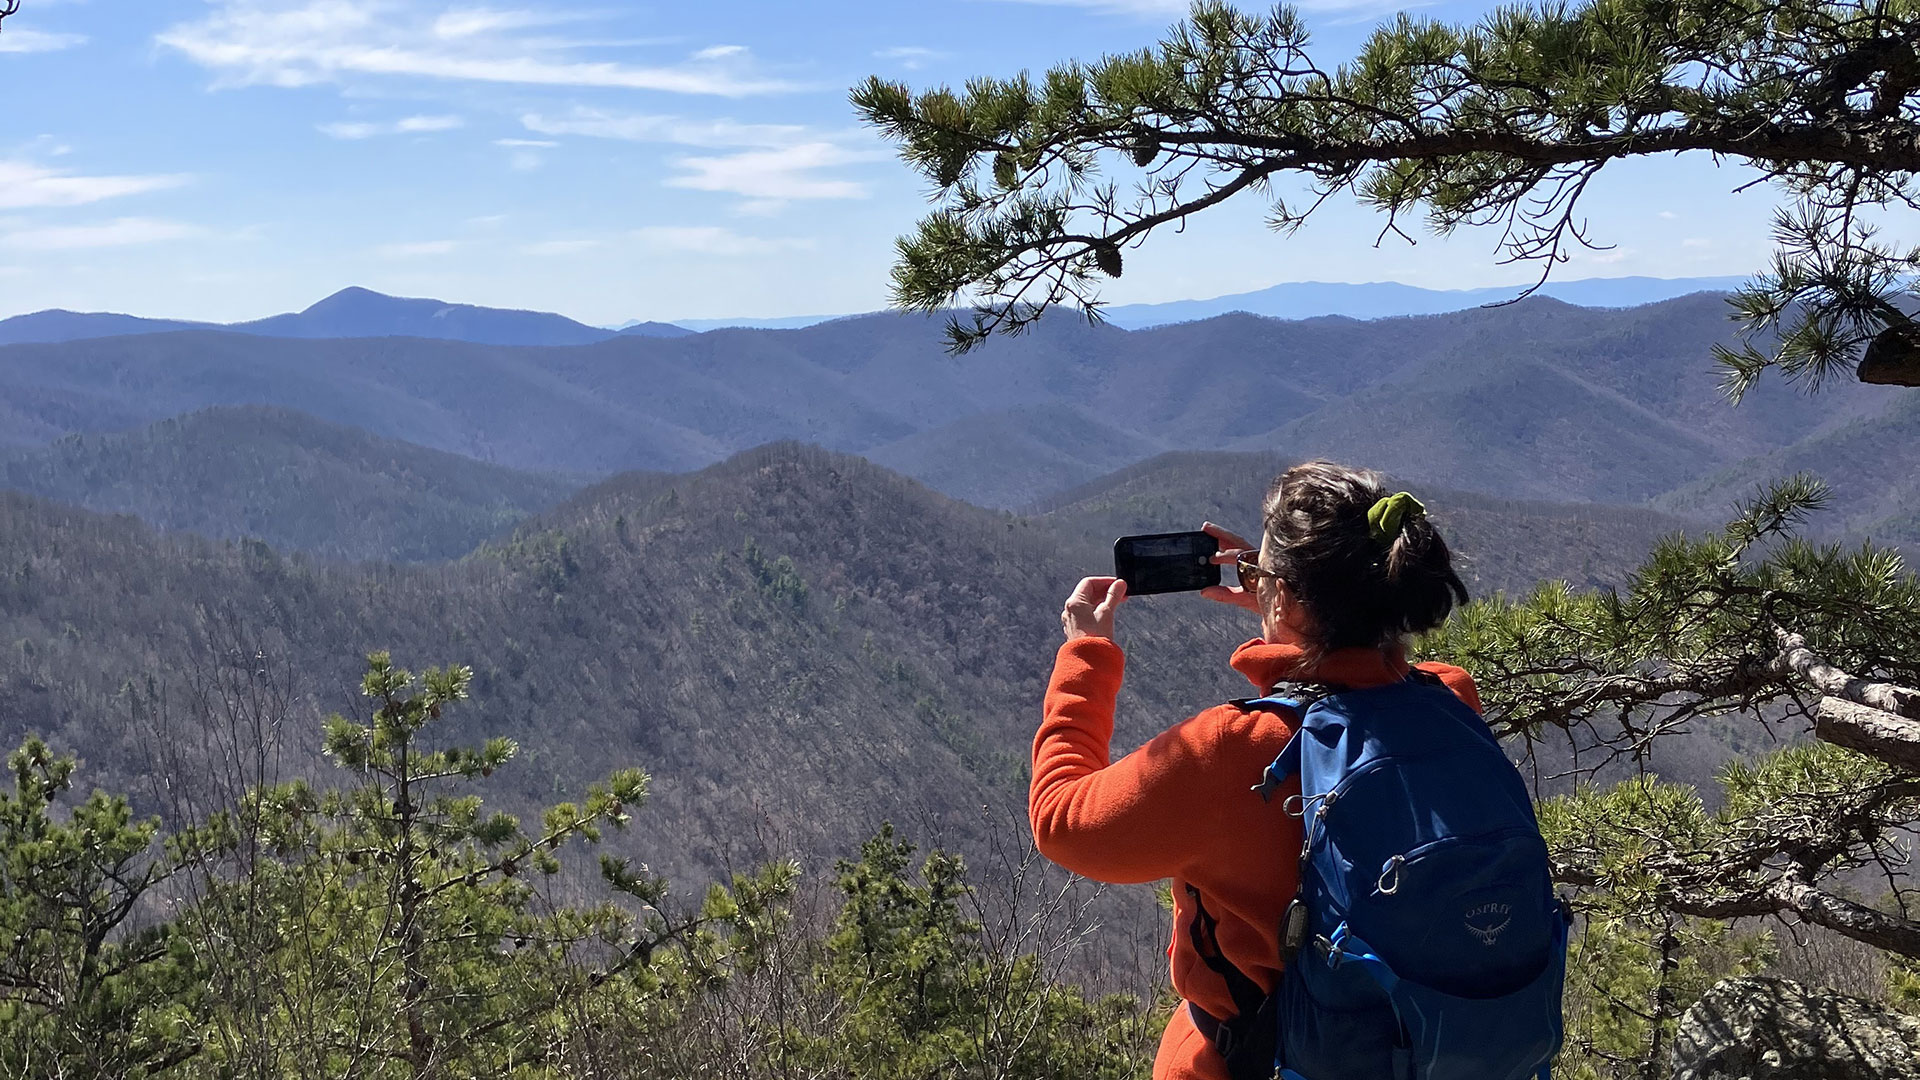 A hiker turns away from the camera to take a photo of a valley with her phone